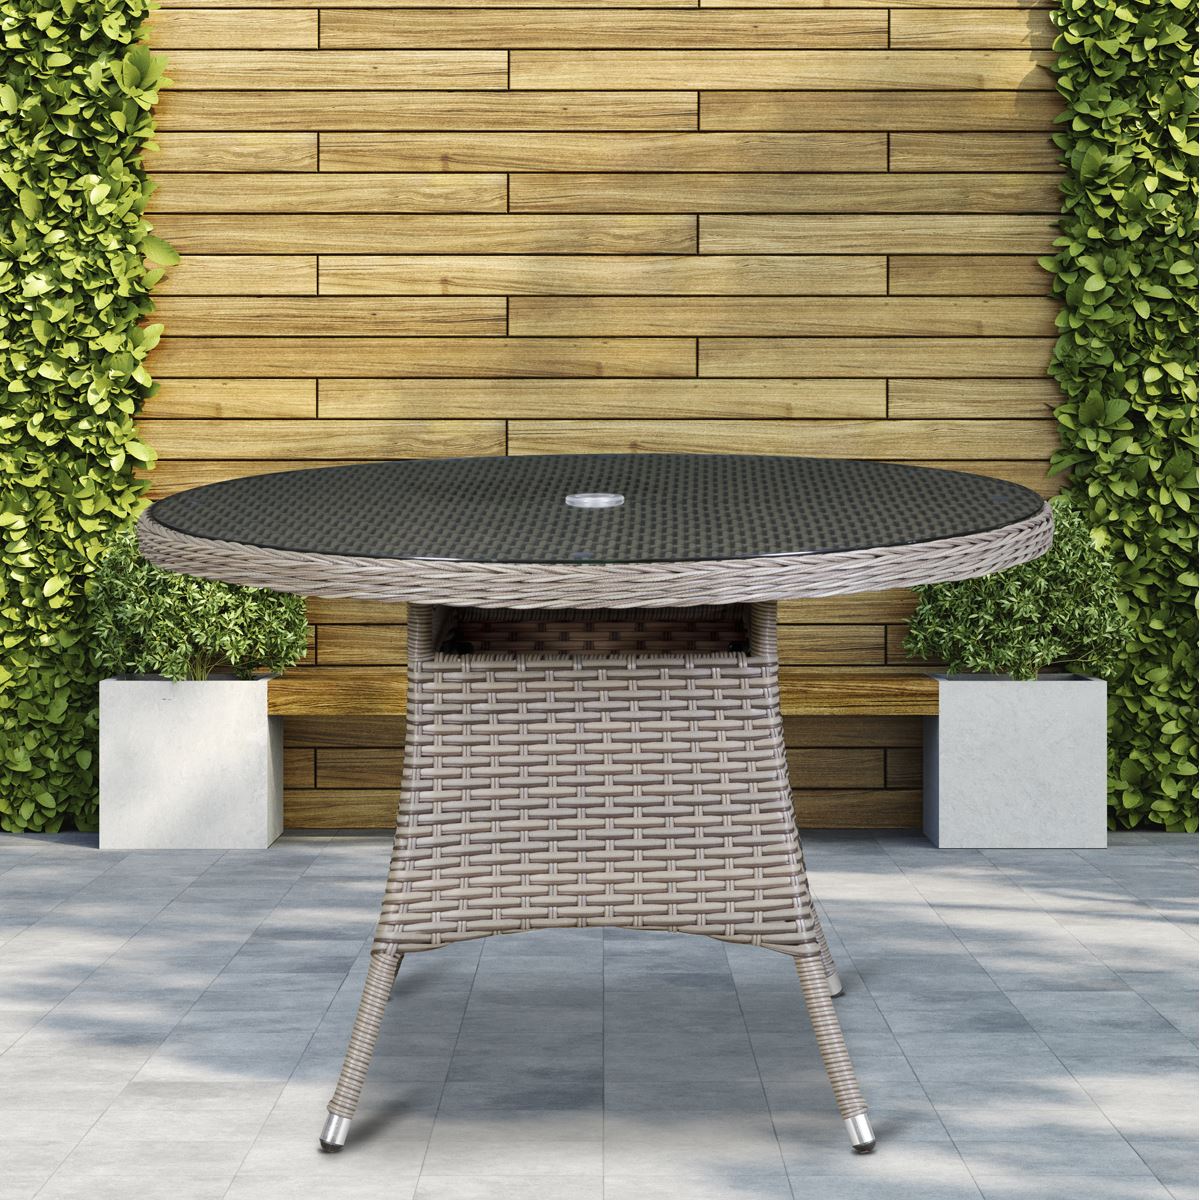 Dellonda Chester Rattan Wicker Outdoor Dining Table with Tempered Glass Top, Brown